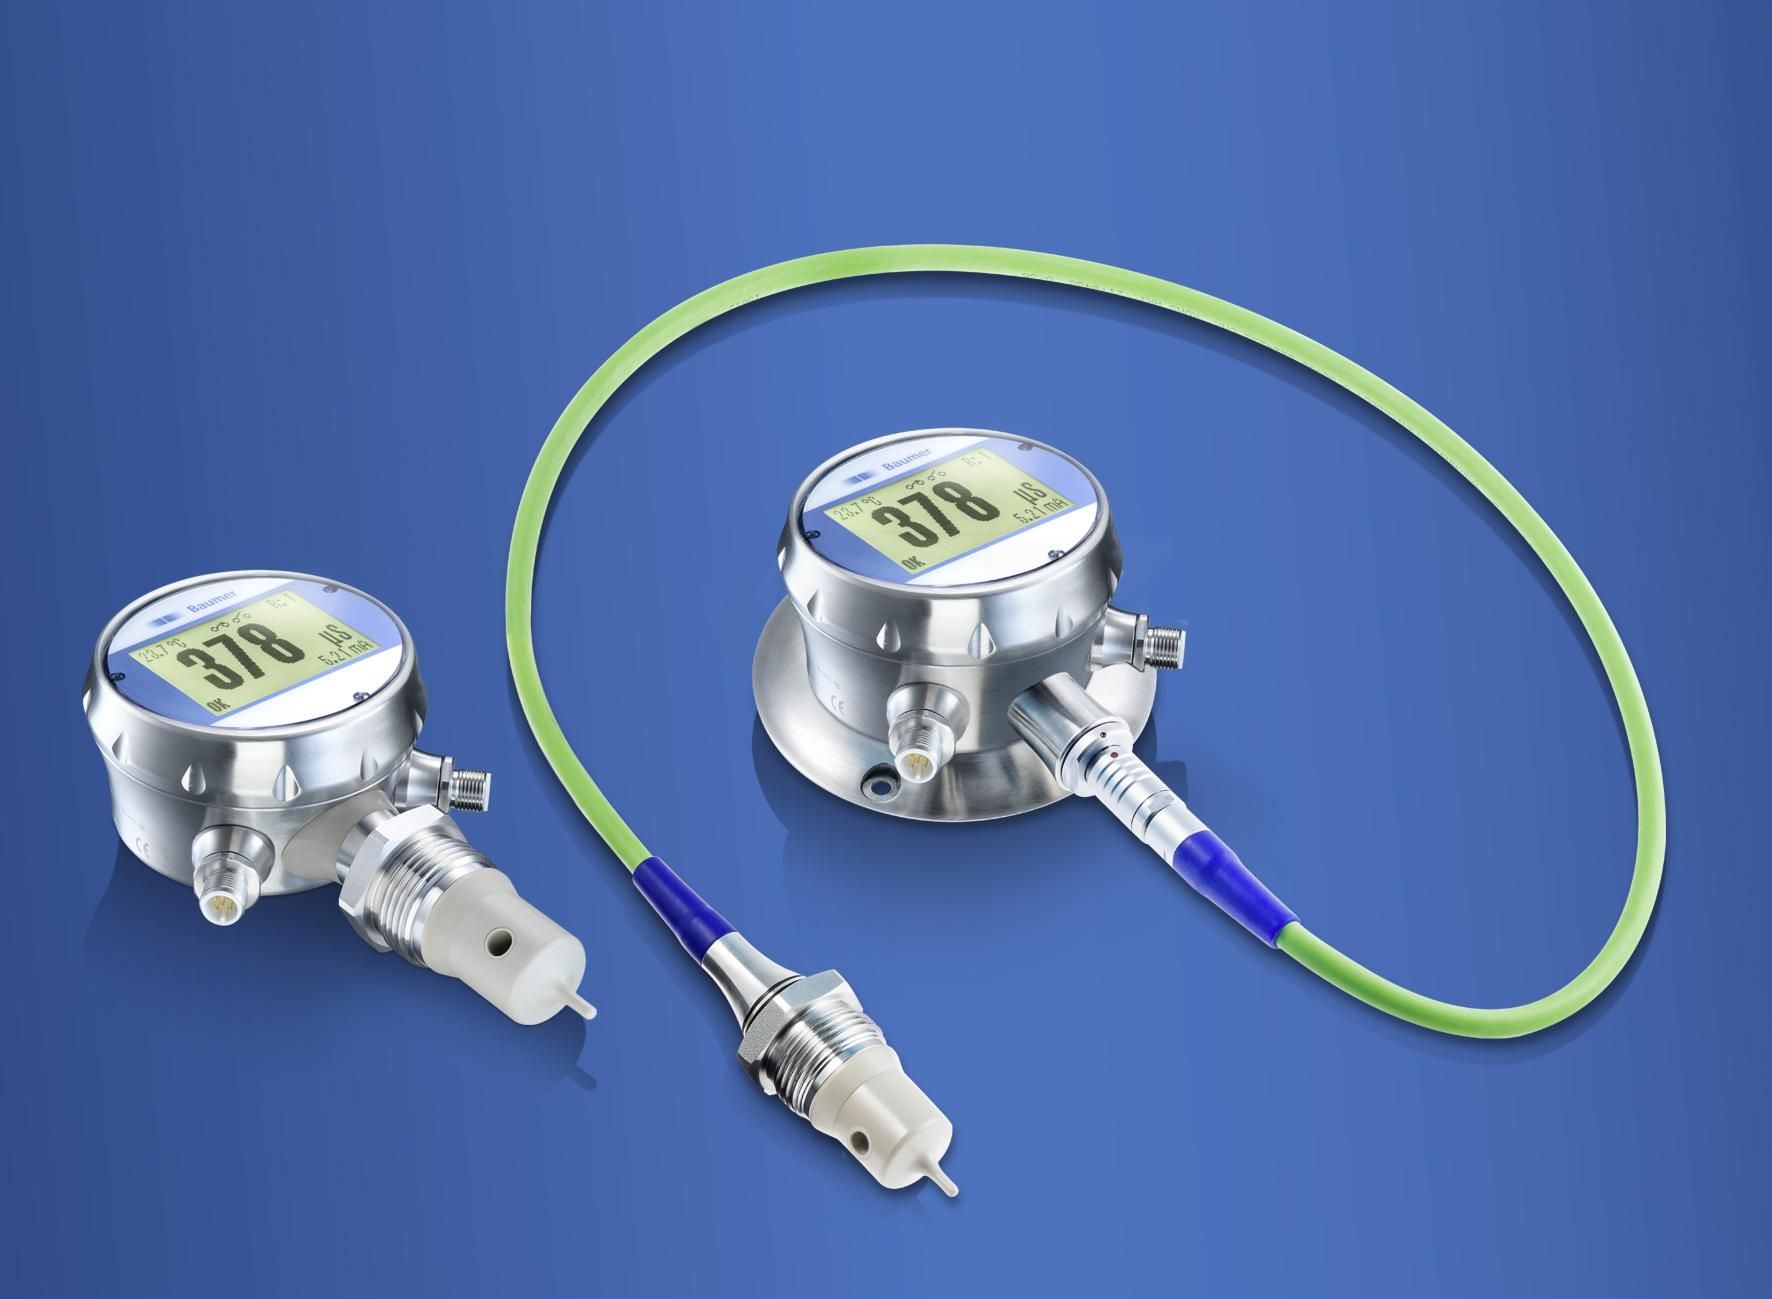 Save water, cleaning agents, and costs – the high-speed CombiLyz conductivity sensor from Baumer